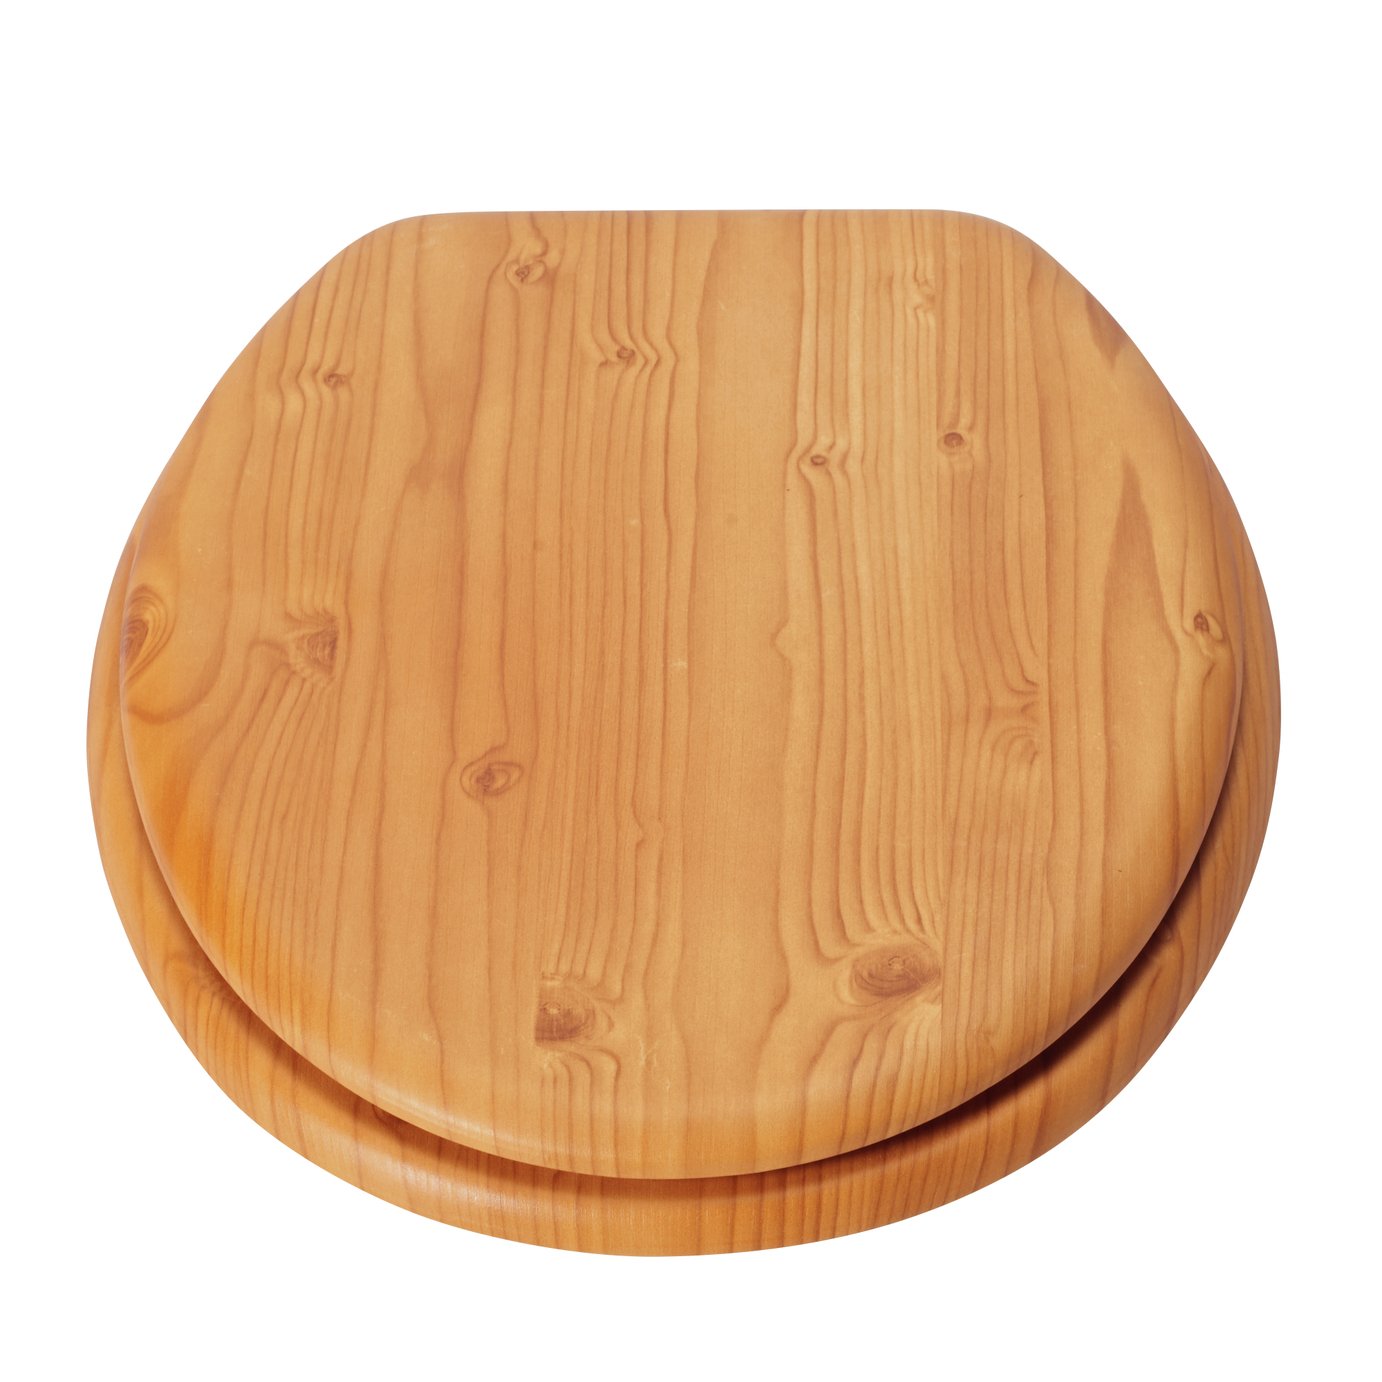 Argos Home Moulded Wood Toilet Seat - Antique Pine Effect (8061924